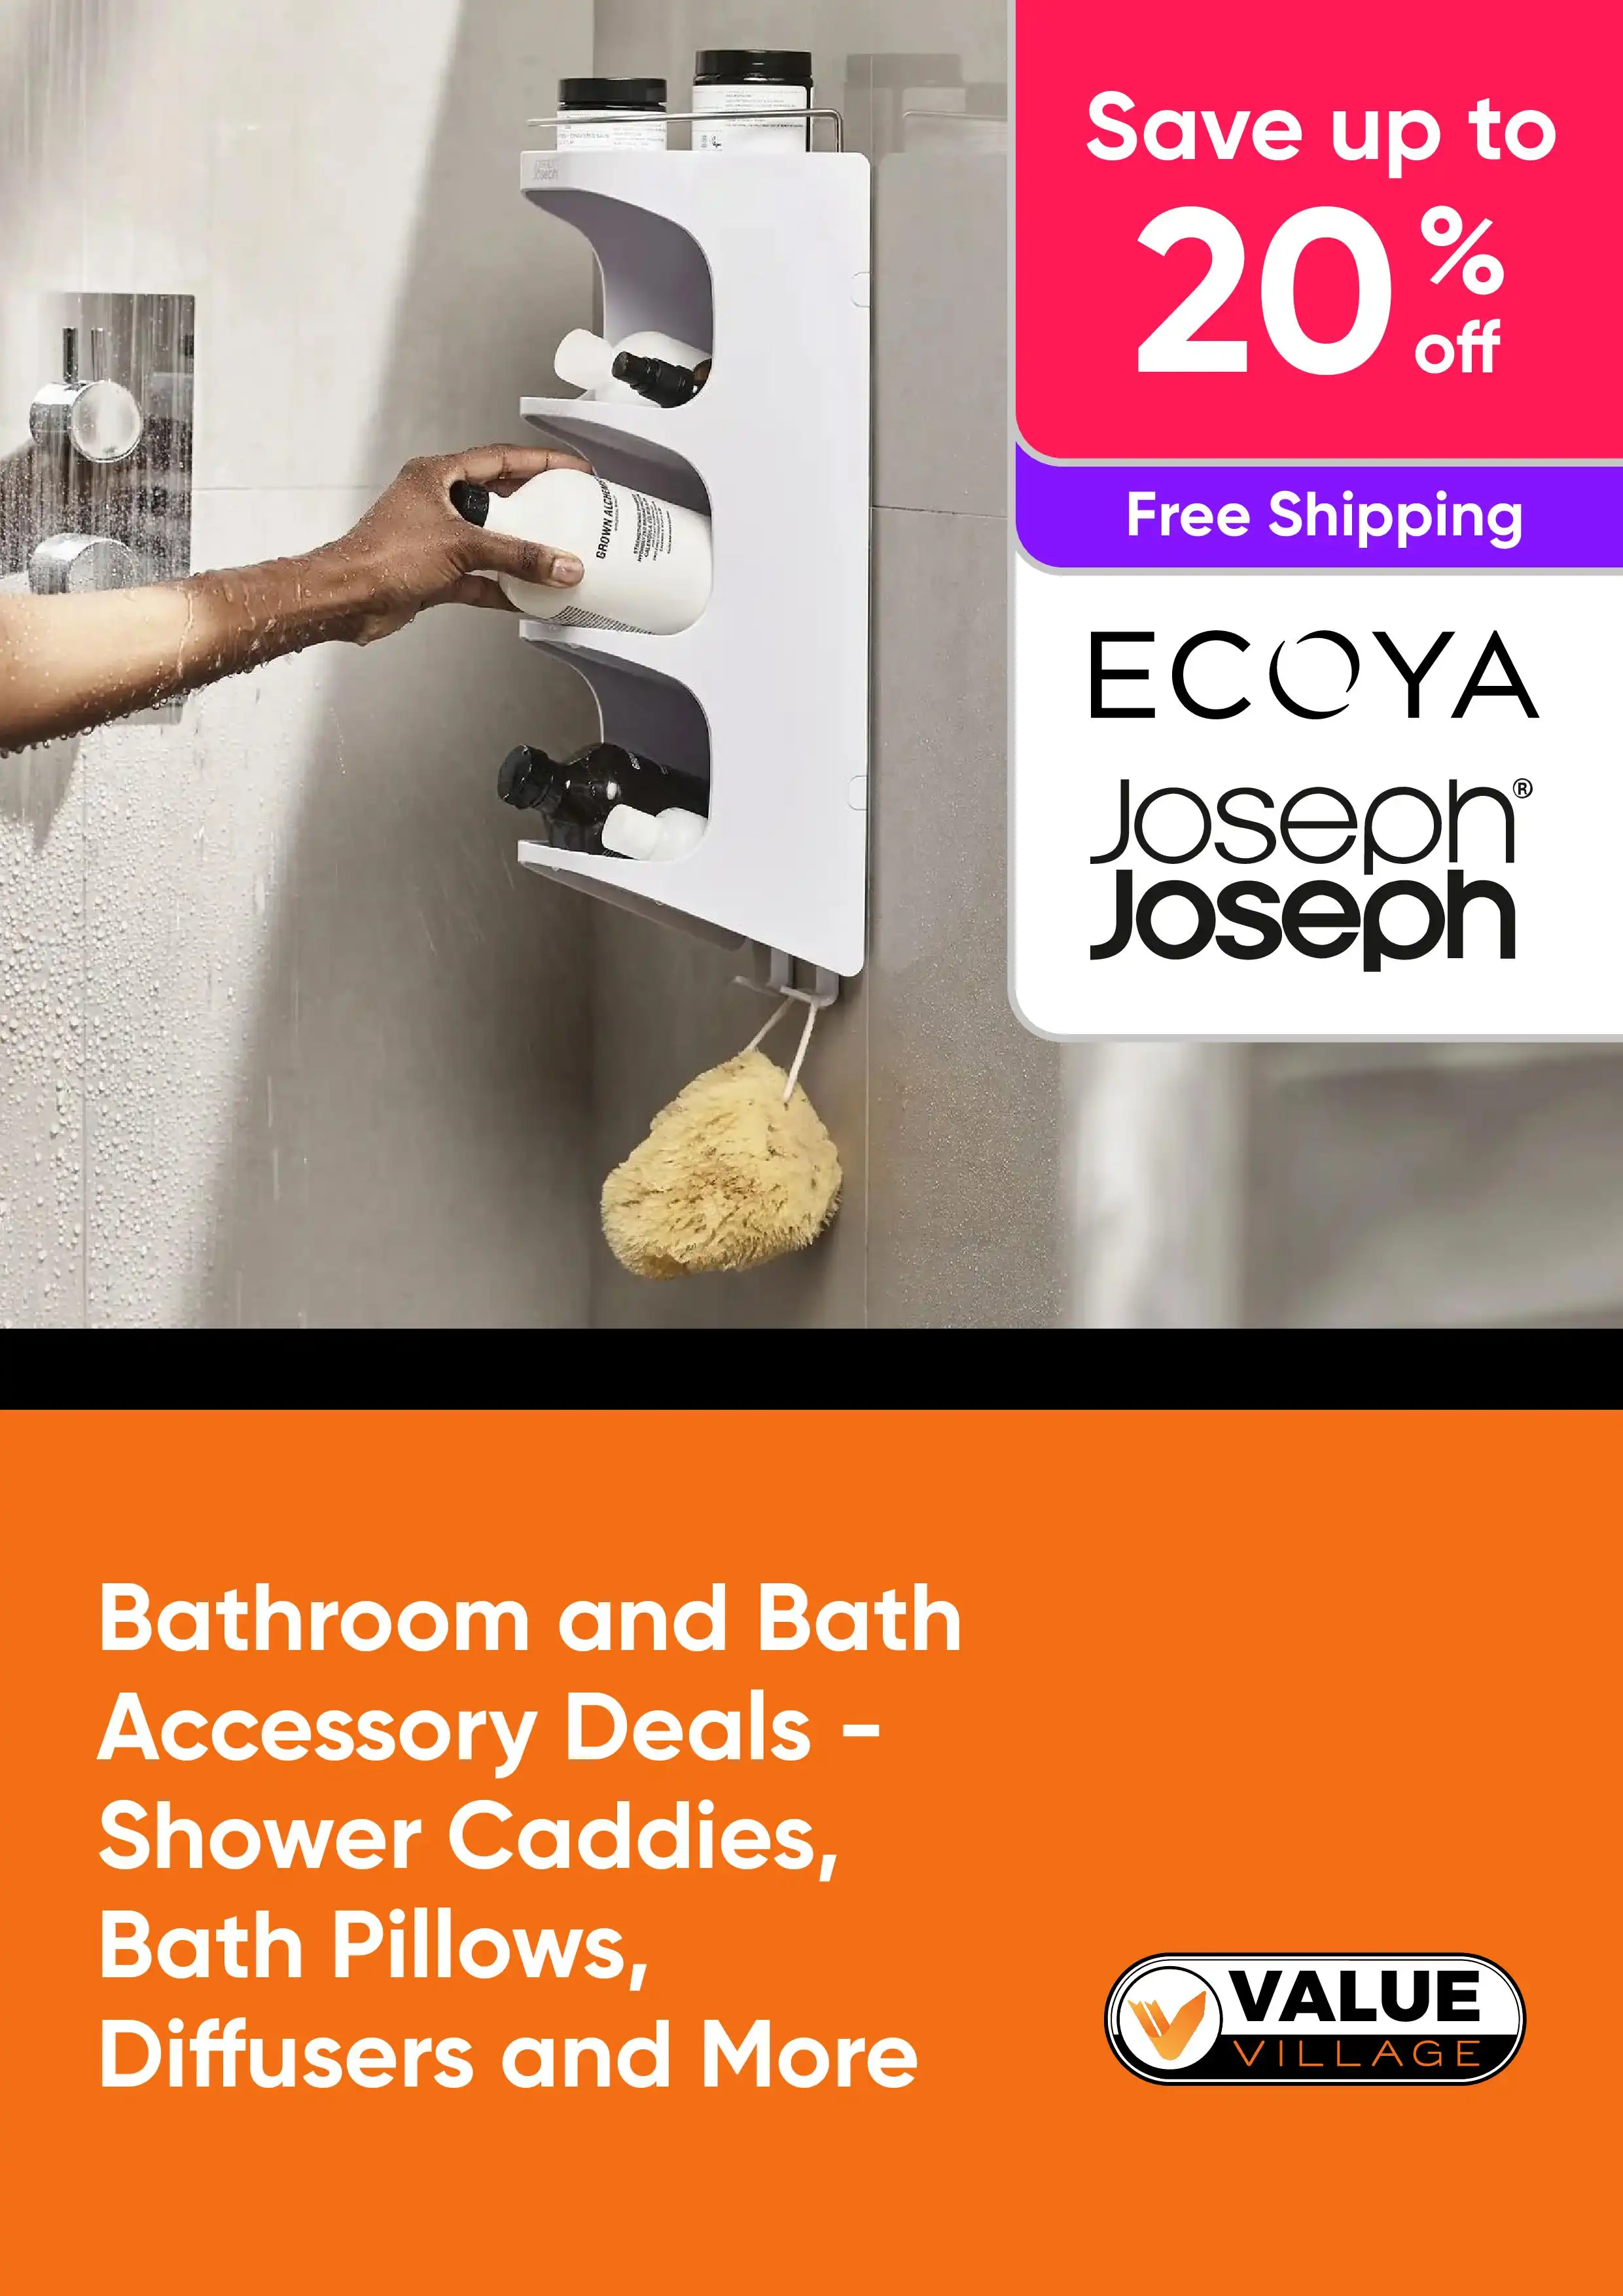 Bathroom and Bath Accessory Deals - Shower Caddies, Diffusers and More - Joseph Joseph, Ecoya - Up to 20% Off